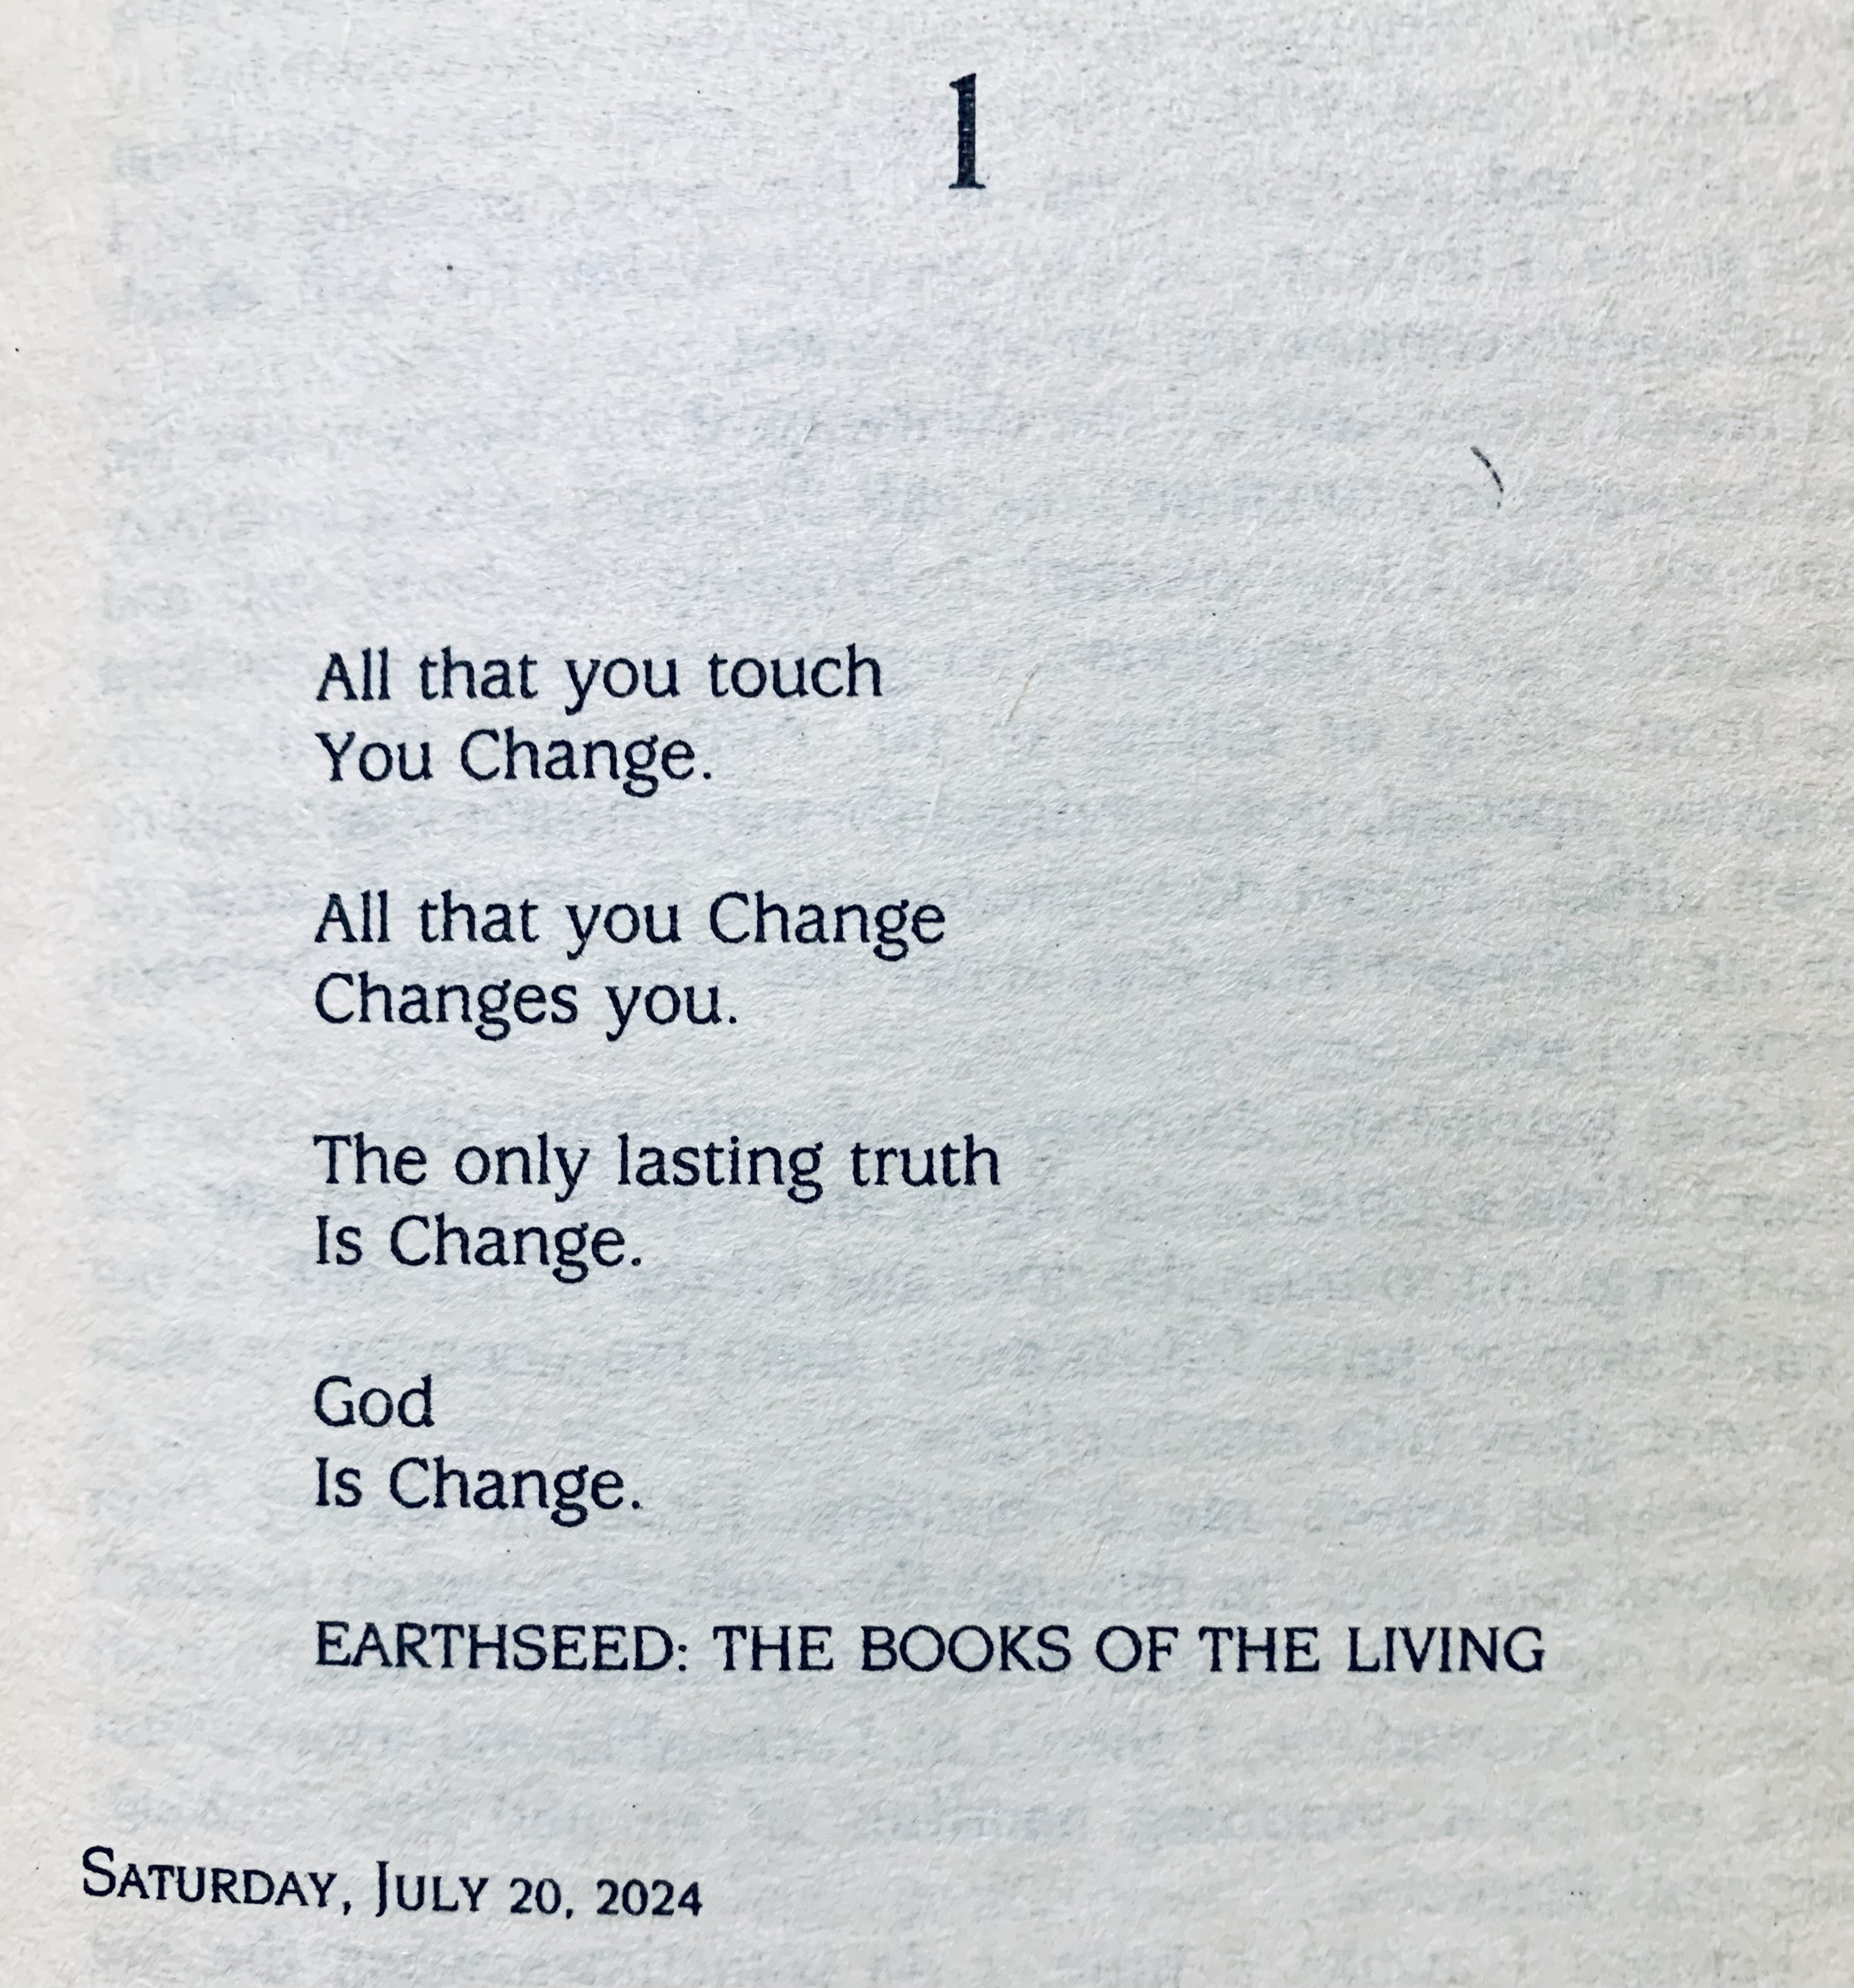 Shown is the opening page of Chapter 1 of Parable of the Sower. The poem reads:

All that you touch
You Change.

All that you Change
Changes you.

The only lasting truth
Is Change.

God 
Is Change.

EARTHSEED: THE BOOKS OF THE LIVING

Saturday, July 20, 2024.